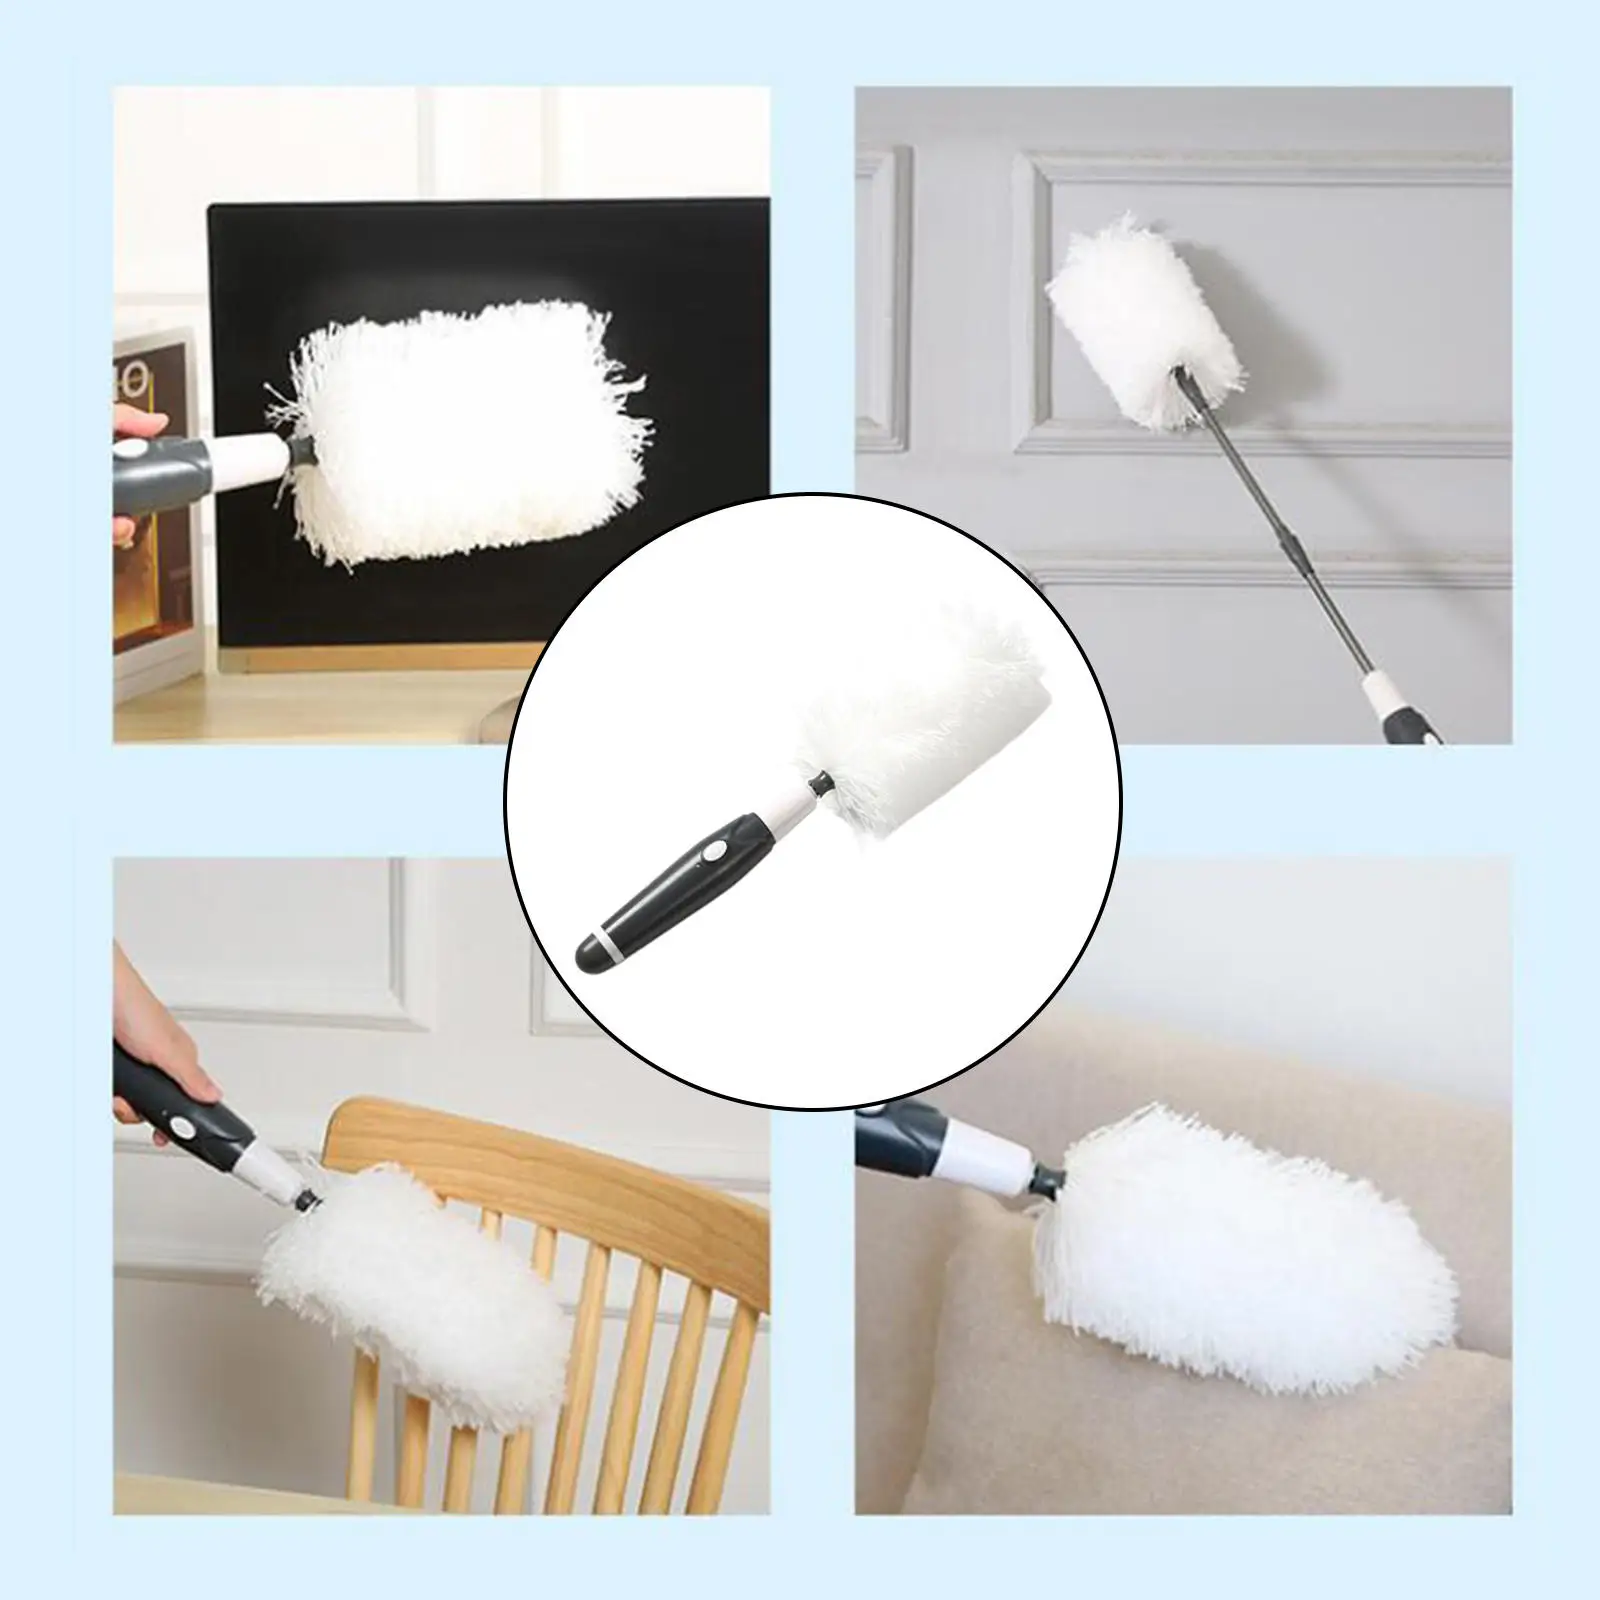 Retractable Dust Brush Telescoping Extension Pole USB Duster for Cleaning High Ceiling Household Brush for Appliances Furniture